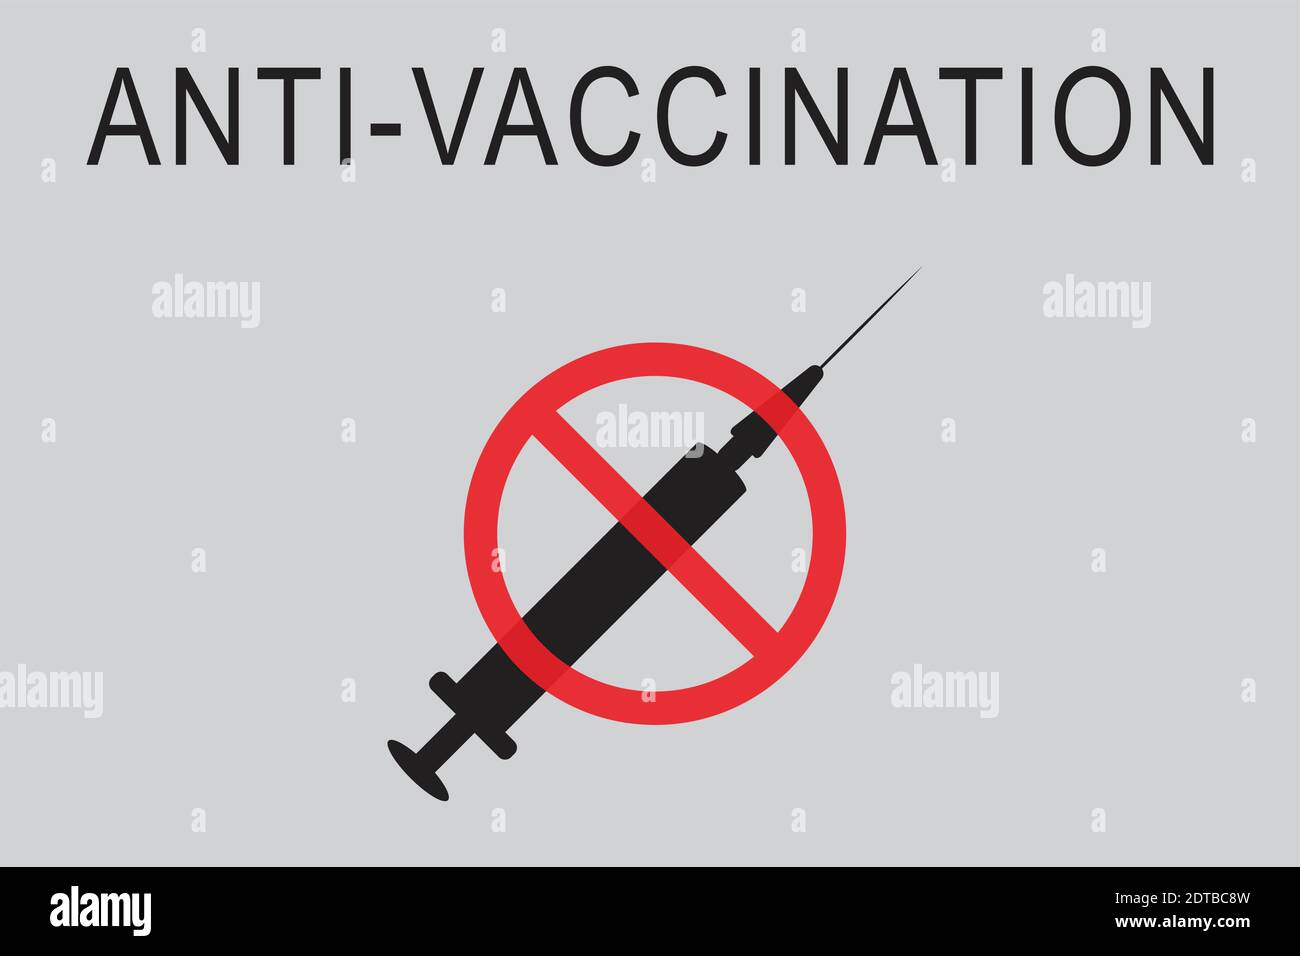 Anti-vaccination needle vector illustration on a light grey background Stock Vector